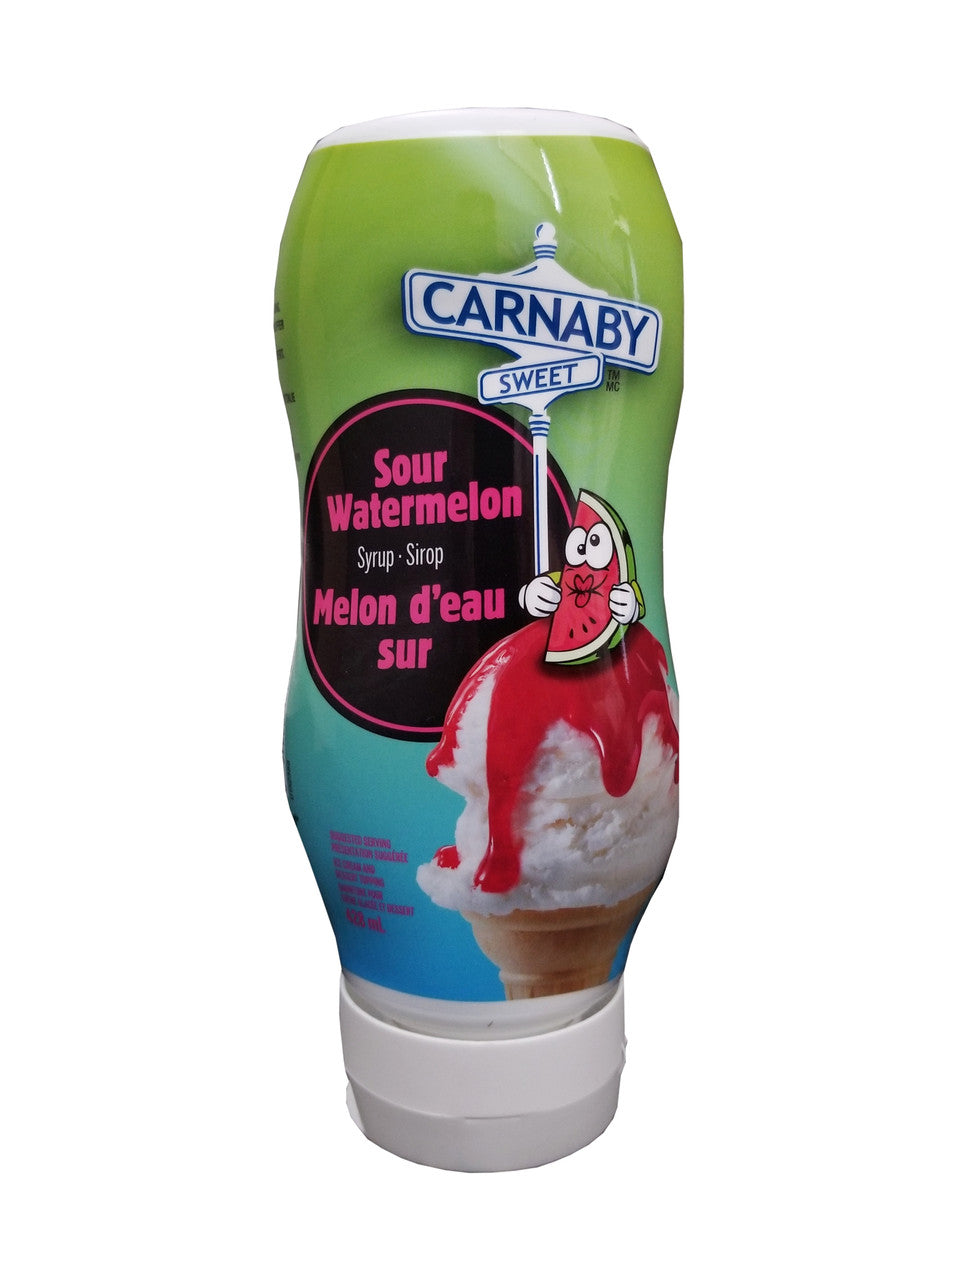 Carnaby Sweet Sour Watermelon Syrup 428mL/14.5 fl. oz. {Imported from Canada}